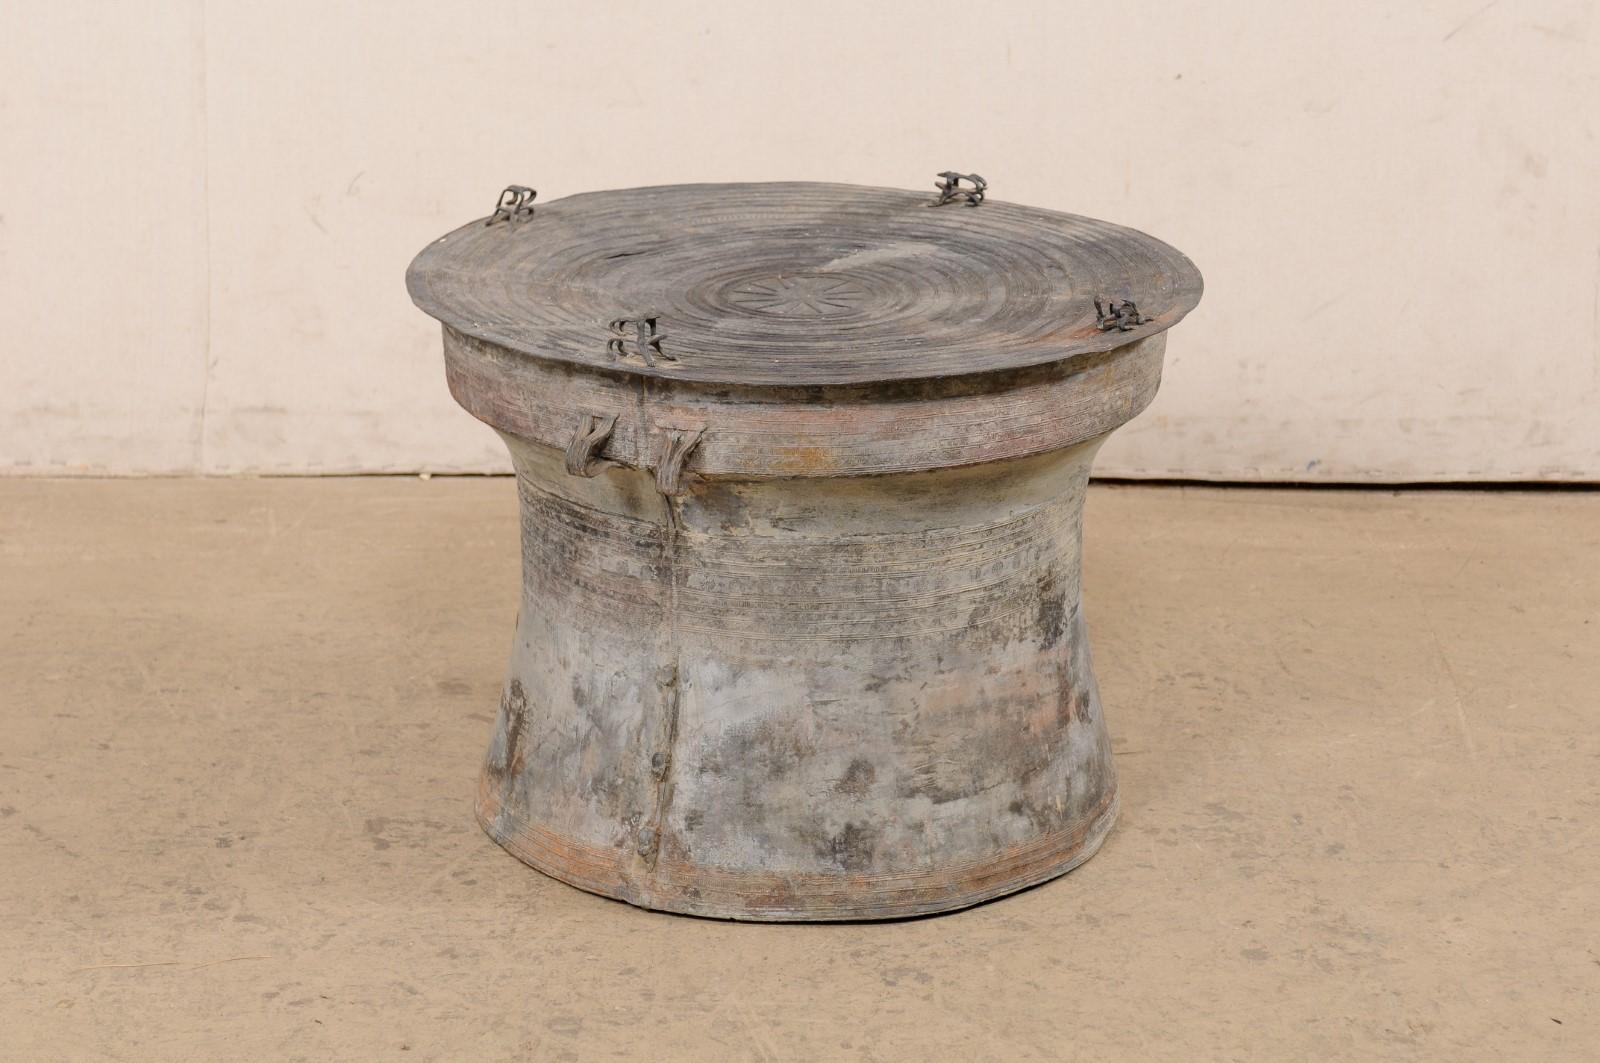 A Thai rain drum with sun and frog accents, from the mid 20th century. This vintage rain drum from Thailand, created from cast bronze, features a round-shaped top which is adorn with a sun at center, within concentric bands (said to represent the